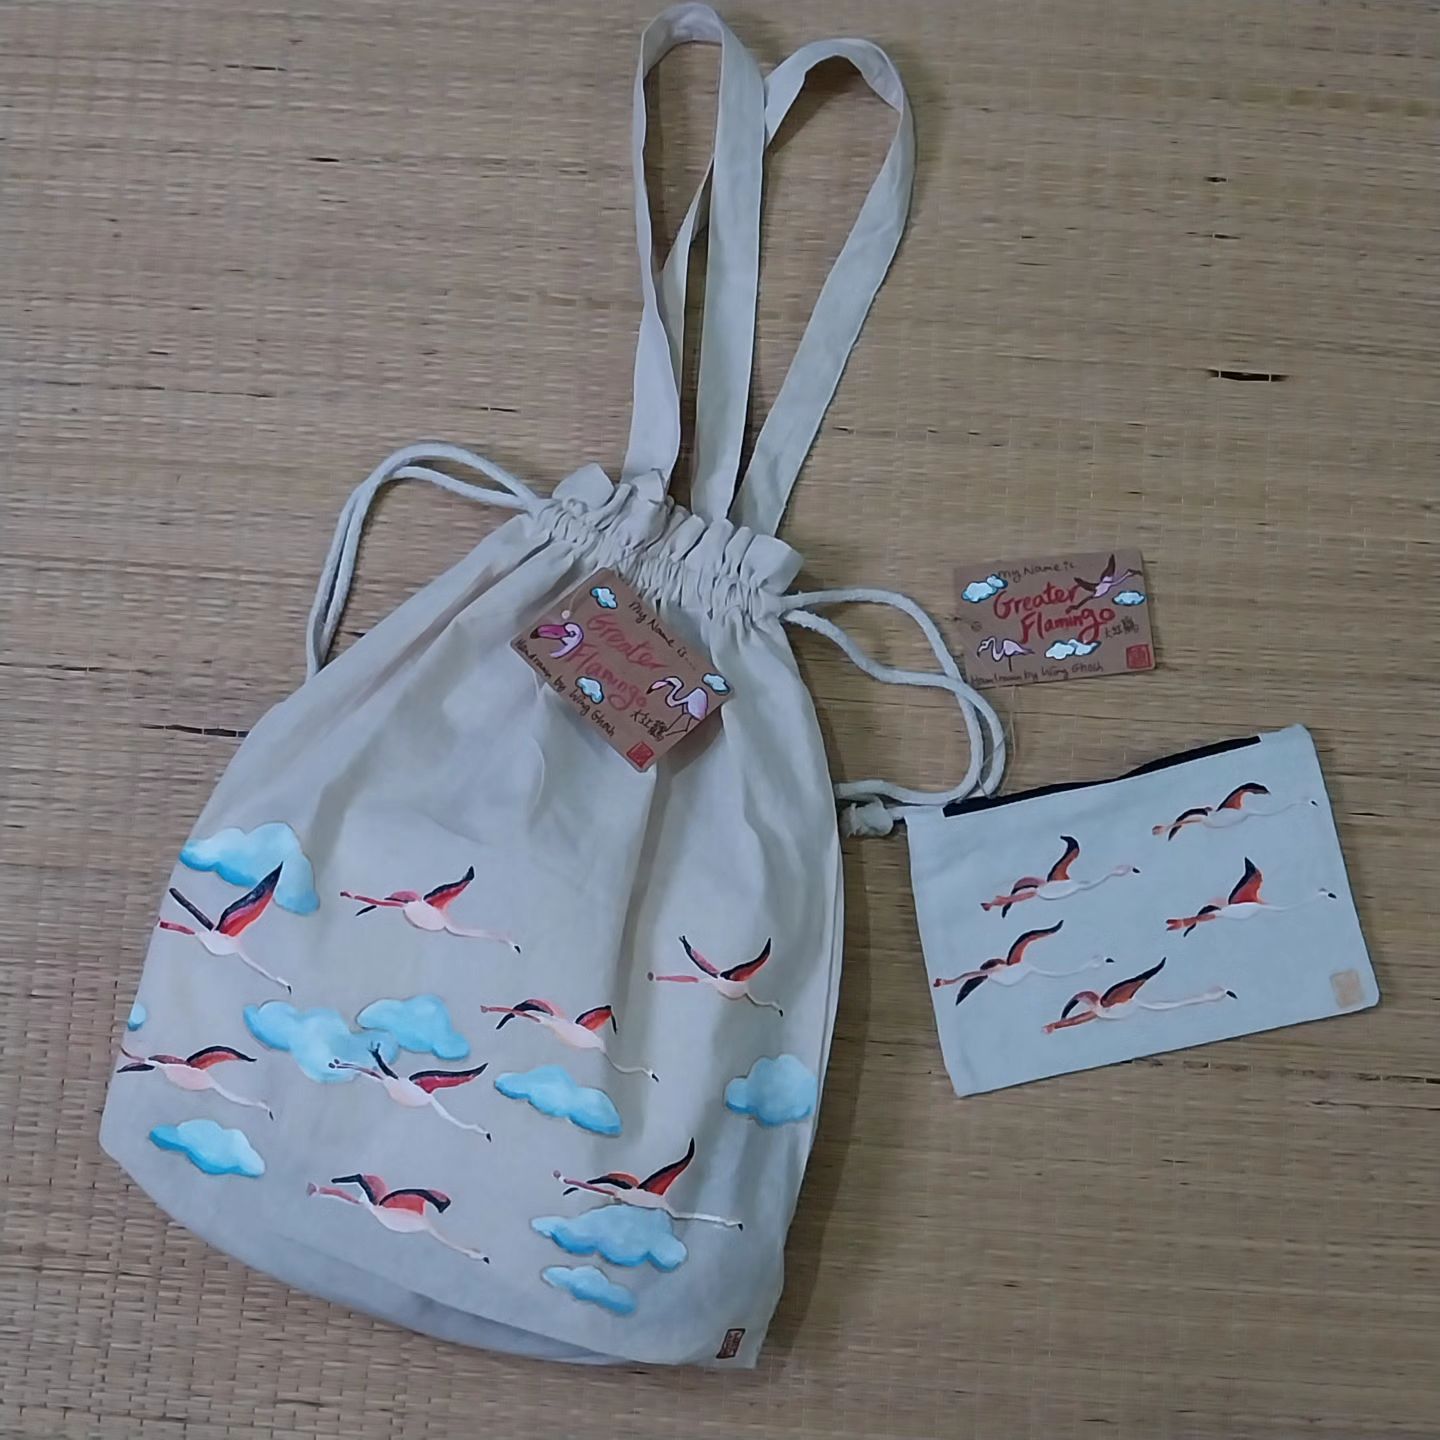 Birds of India Series- Greater Flamingo -bag and pouch combo (total 2 items) – painted by Wing-yin LAU